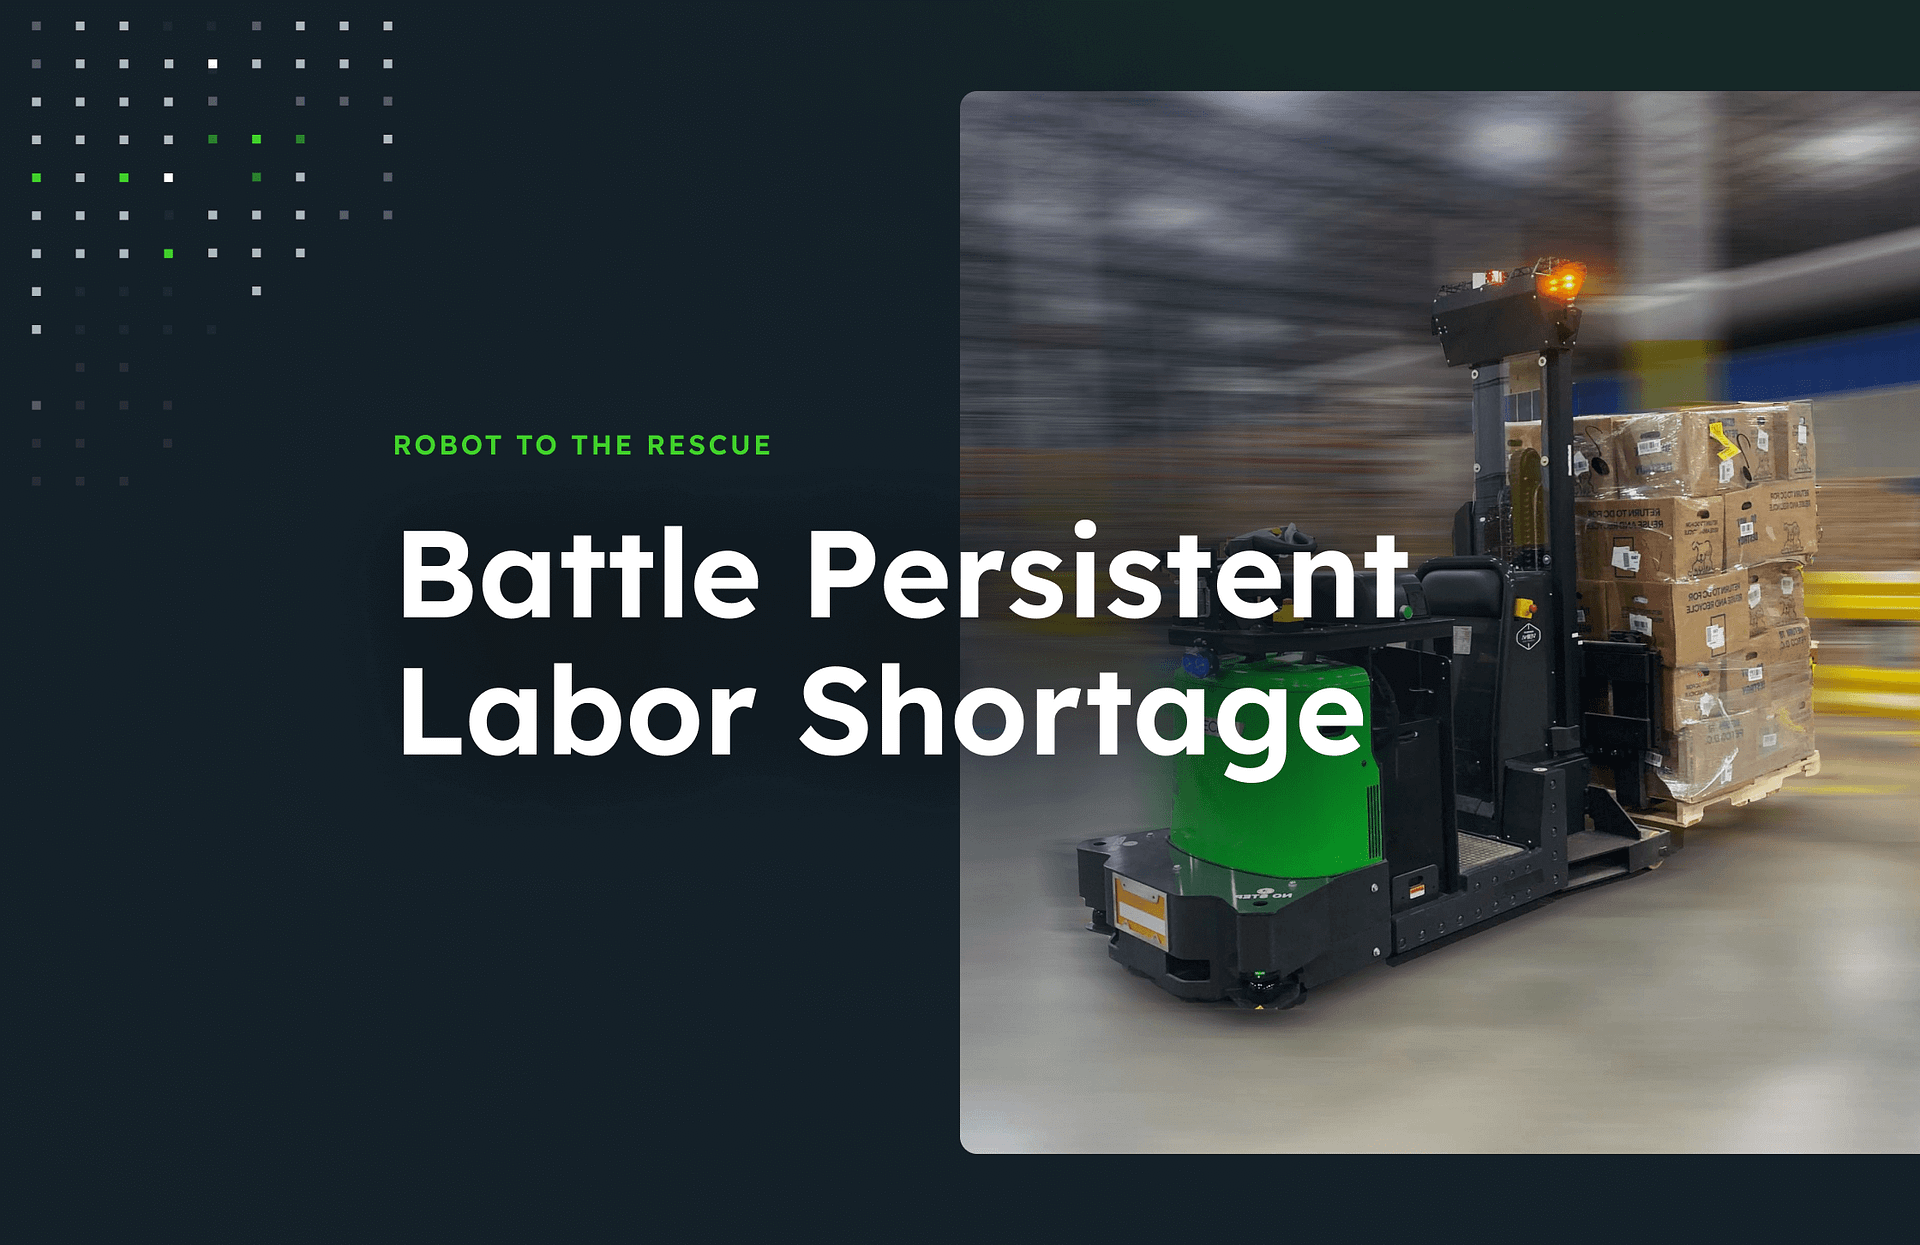 Battle persistent labor shortage text on photo of a robot moving a pallet of boxes